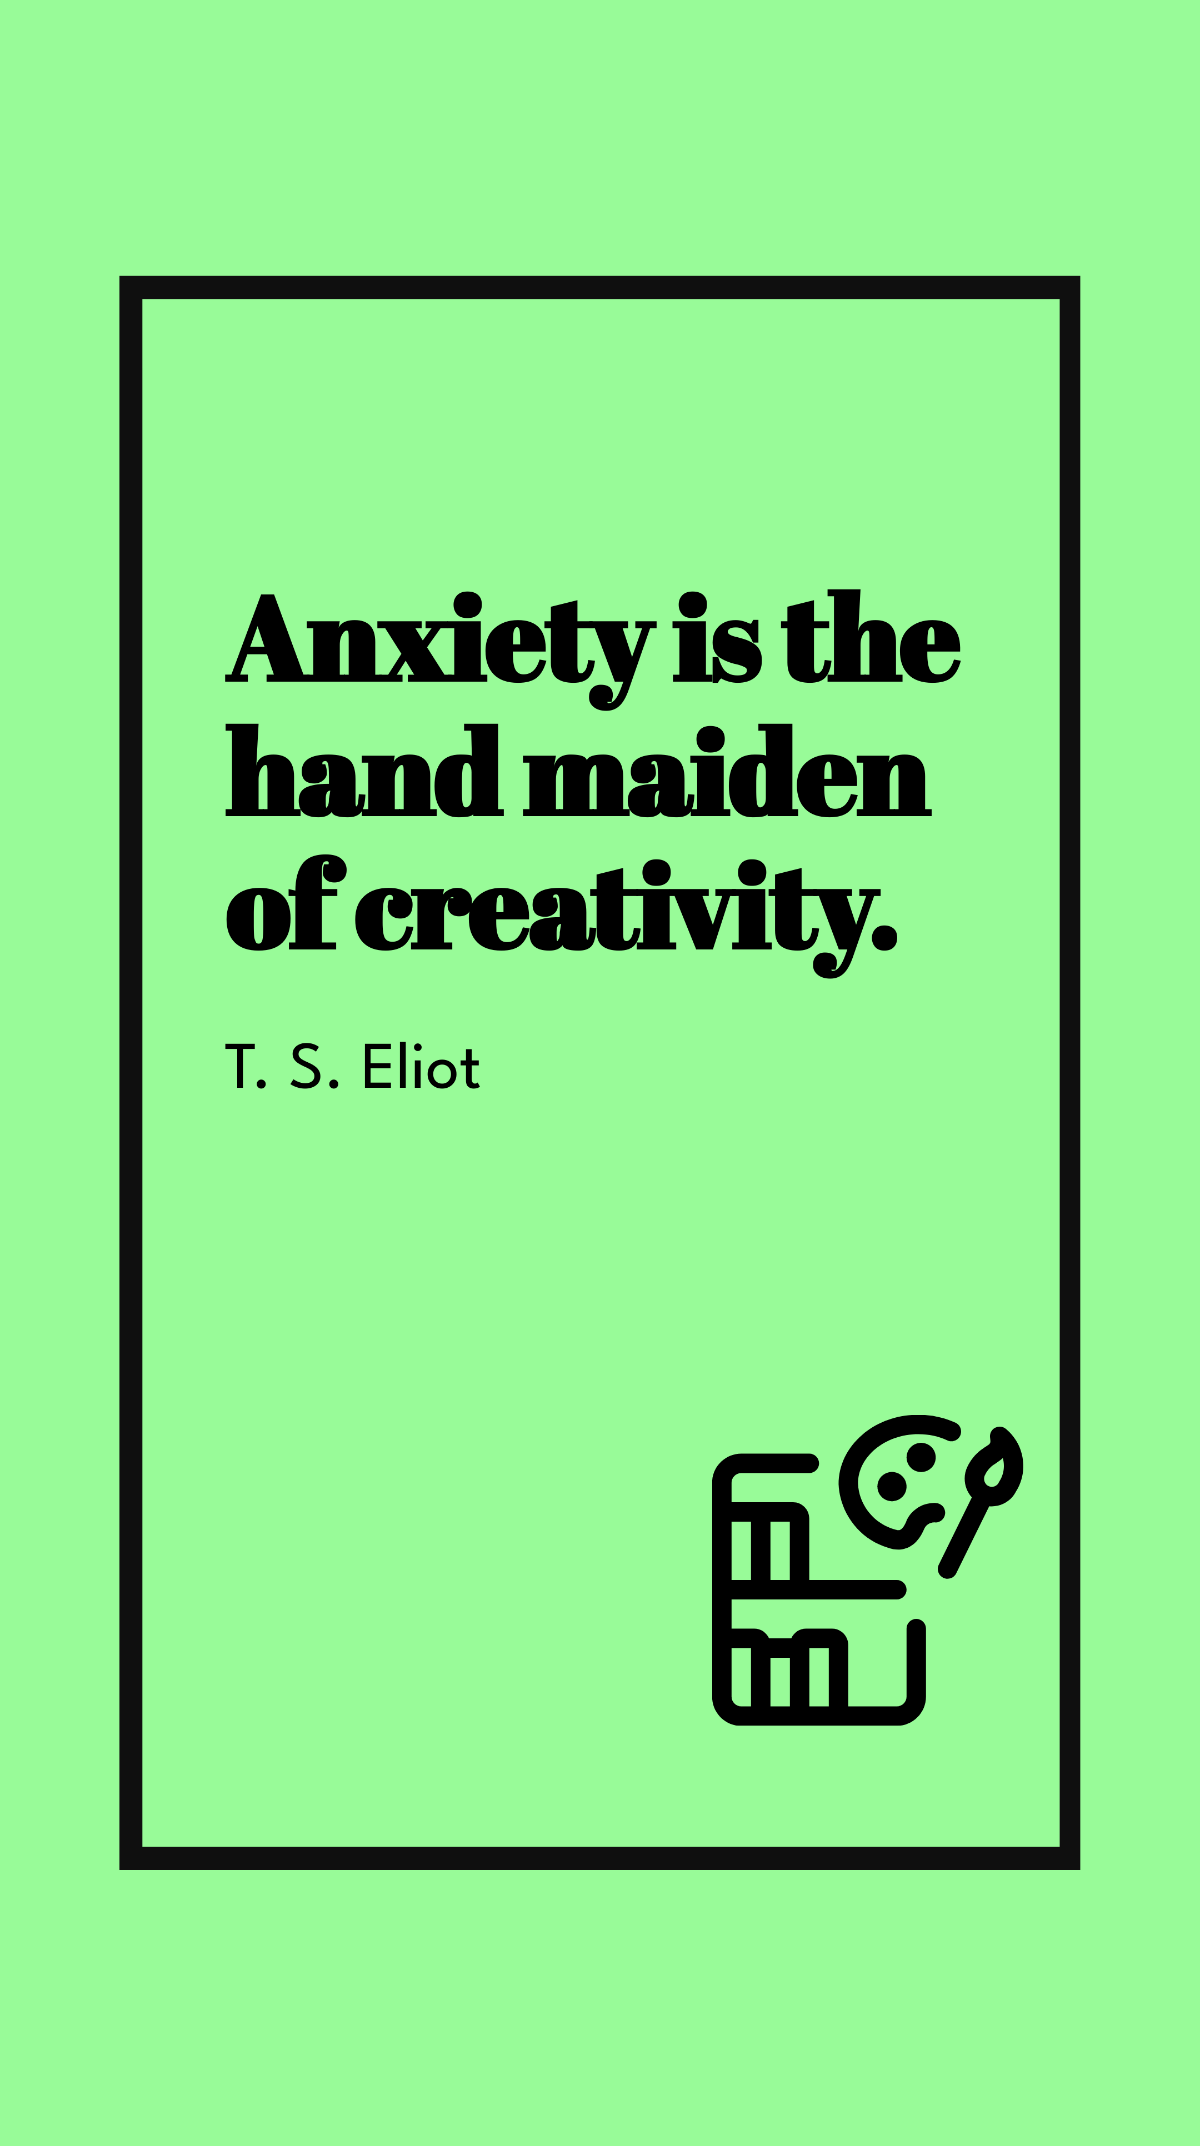 T. S. Eliot - Anxiety is the hand maiden of creativity. Template